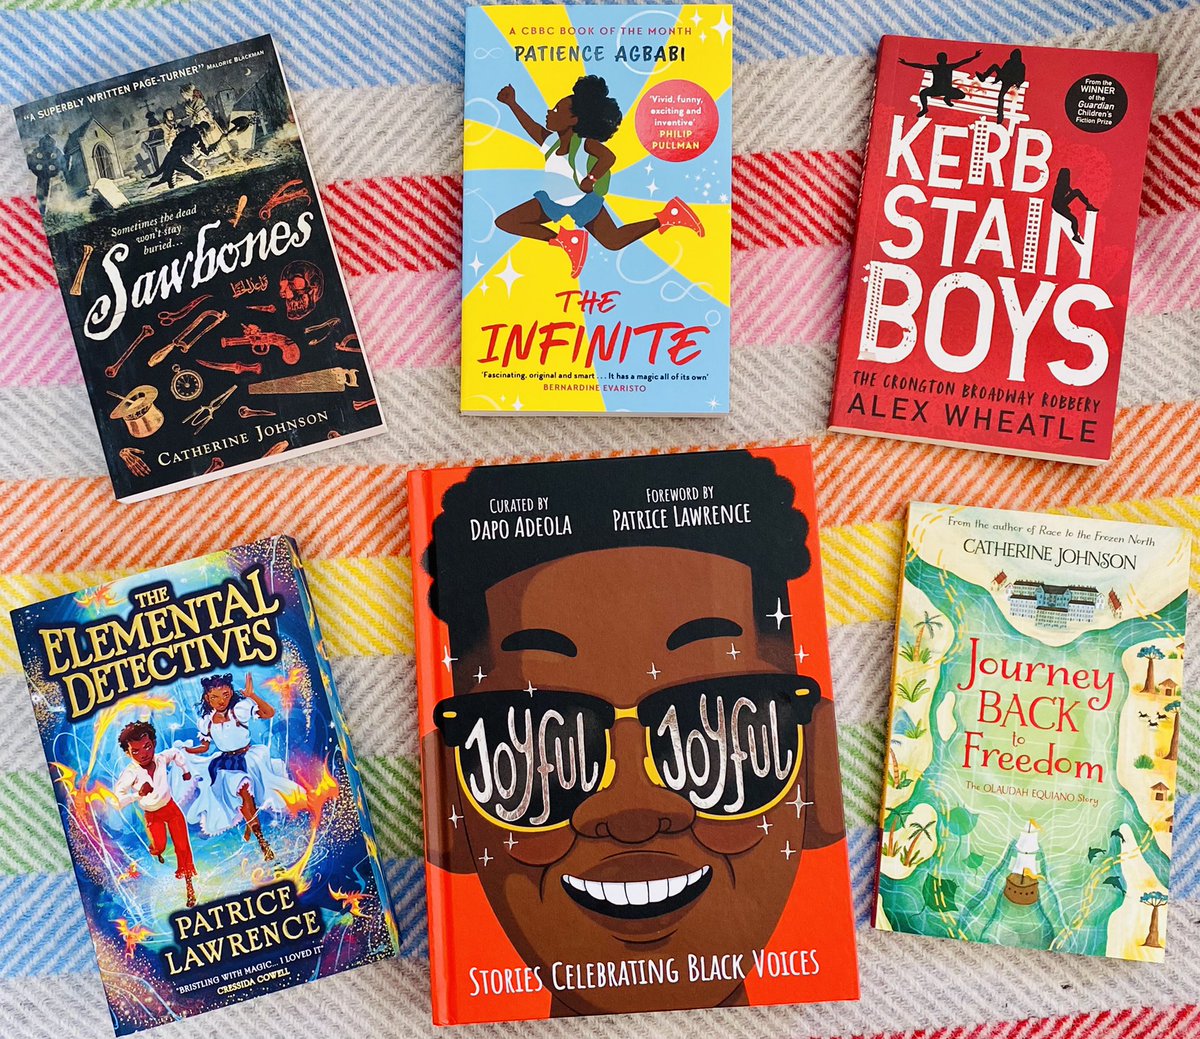 🌟📚 #GIVEAWAY TIME 📚🌟 To celebrate #BlackHistoryMonth we have 6 spectacular books to give away 📚📚🎉 For your chance to #WIN, just RETWEET & FOLLOW before midnight on Friday Oct 14th 📒📕📙📕📒📘📗📘📒📕📙📕📒 #BookTwitter #AuthorsOfTwitter